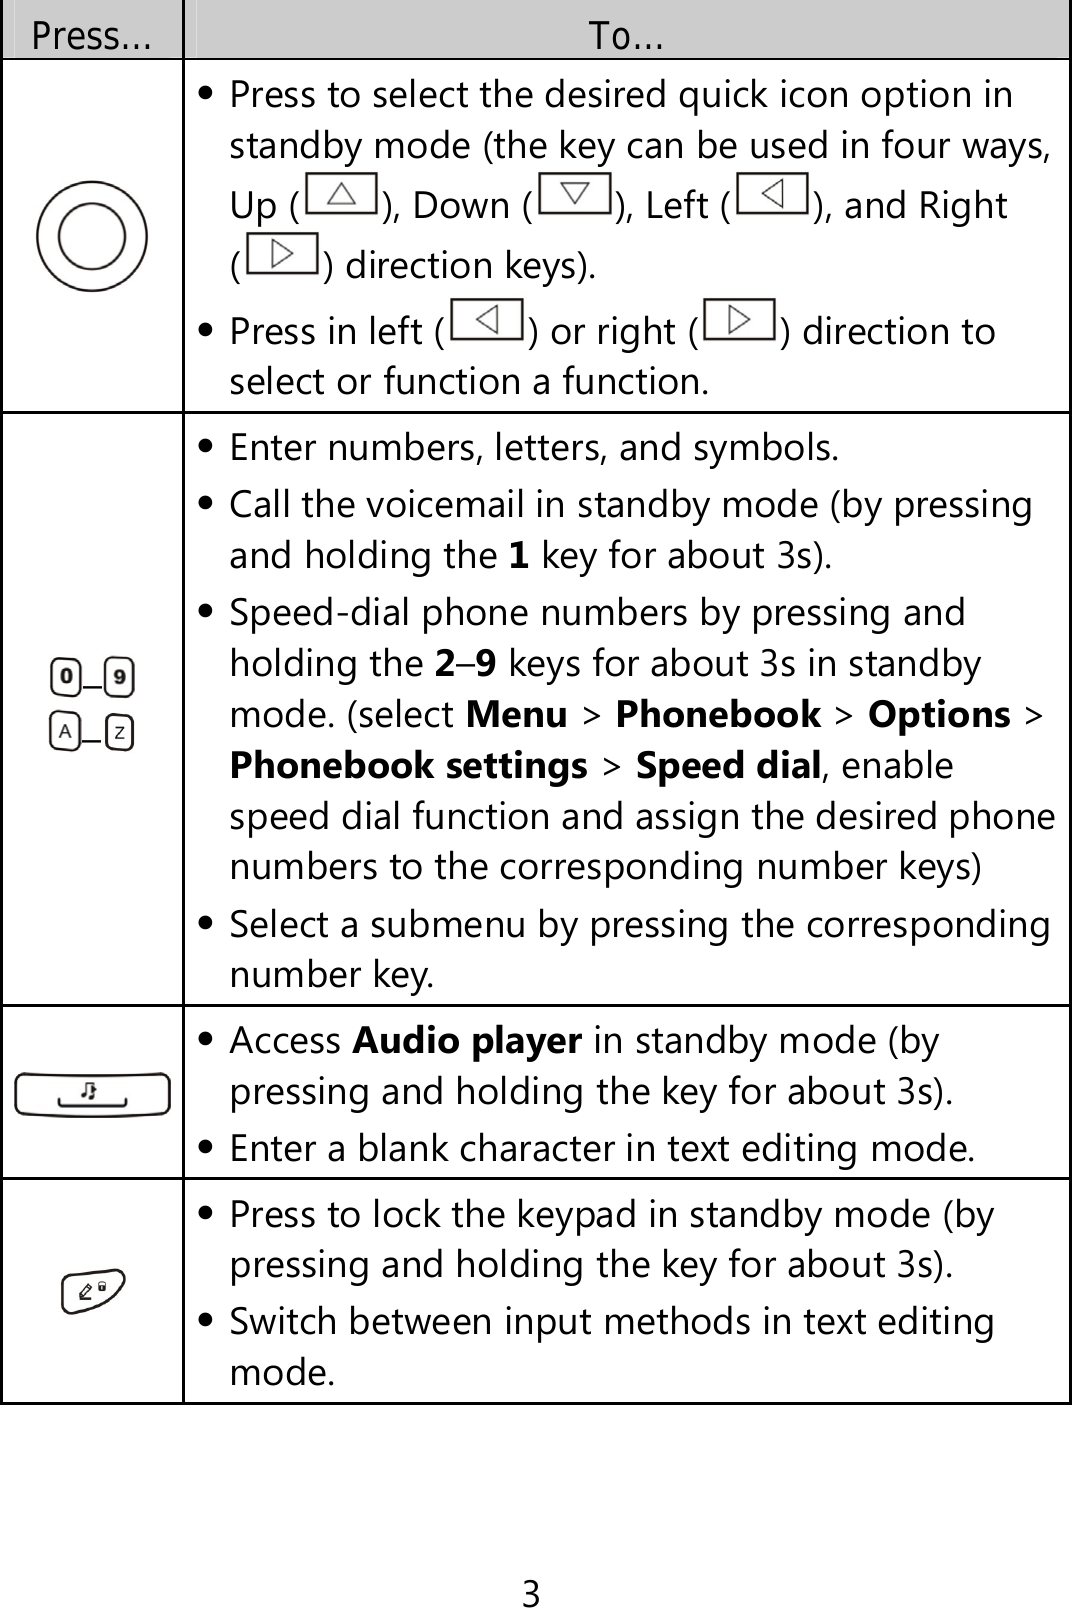 3 Press… To…  Press to select the desired quick icon option in standby mode (the key can be used in four ways, Up ( ), Down ( ), Left ( ), and Right () direction keys).  Press in left ( ) or right ( ) direction to select or function a function. –  –   Enter numbers, letters, and symbols.  Call the voicemail in standby mode (by pressing and holding the 1 key for about 3s).  Speed-dial phone numbers by pressing and holding the 2–9 keys for about 3s in standby mode. (select Menu &gt; Phonebook &gt; Options &gt; Phonebook settings &gt; Speed dial, enable speed dial function and assign the desired phone numbers to the corresponding number keys)  Select a submenu by pressing the corresponding number key.   Access Audio player in standby mode (by pressing and holding the key for about 3s).  Enter a blank character in text editing mode.   Press to lock the keypad in standby mode (by pressing and holding the key for about 3s).  Switch between input methods in text editing mode. 